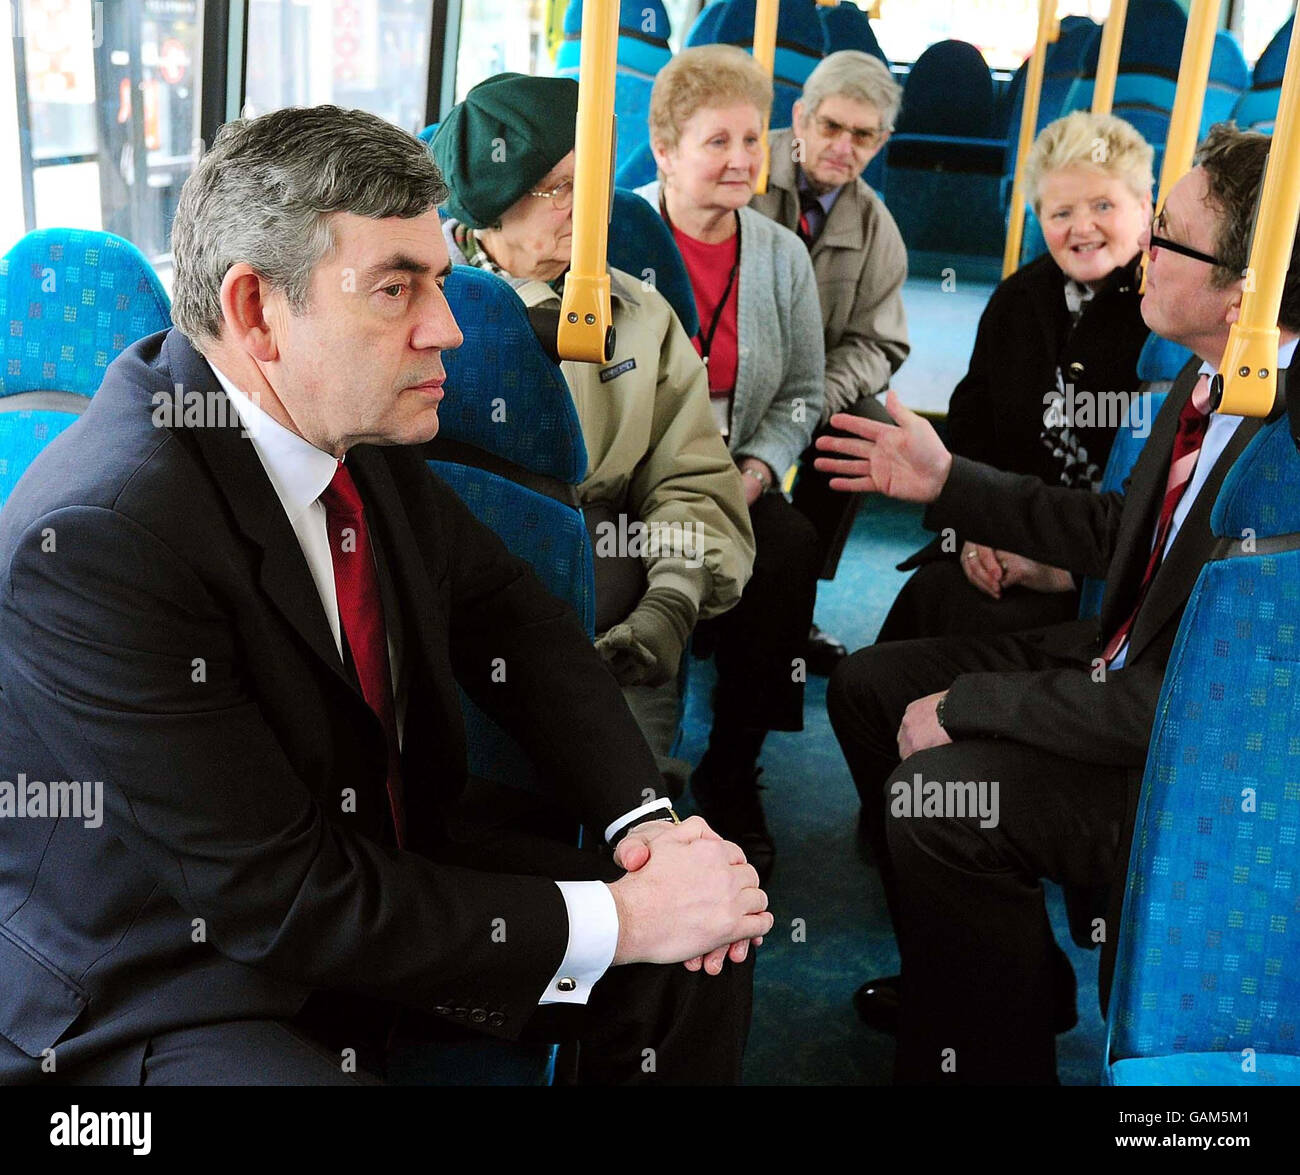 British Prime Minister Gordon Brown meets pensioners on a bus in Leicester today to talk about free bus travel. Stock Photo